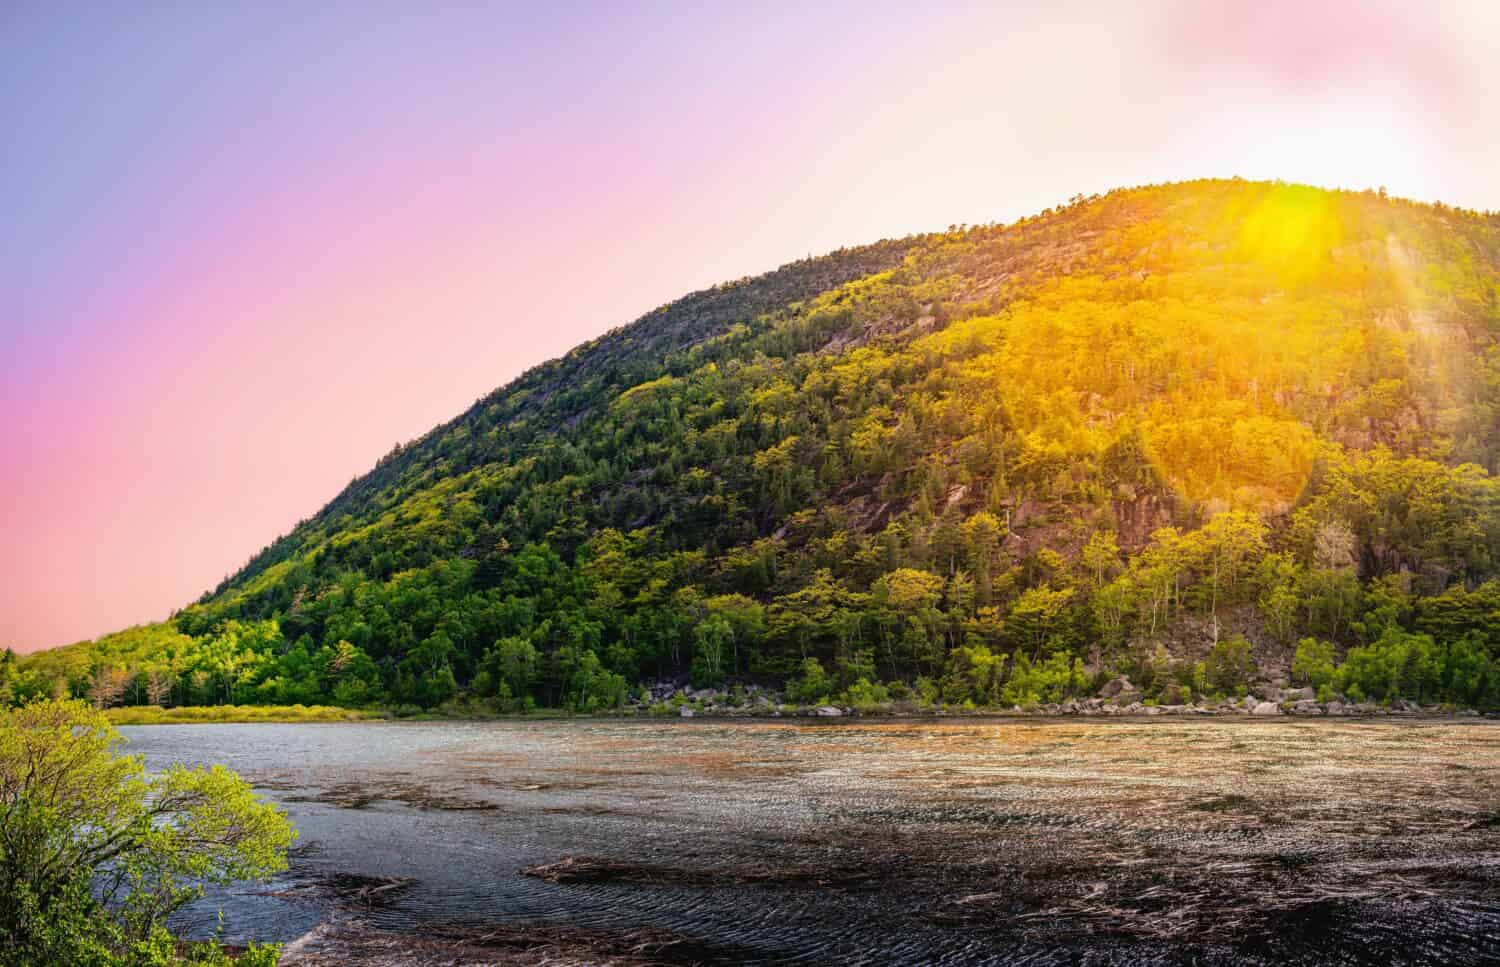 Sunset in Mount Desert Island over Hamilton Pond in Hancock County, Maine, United States, spring Bar Harbor wilderness hiking trail landscape after rain 